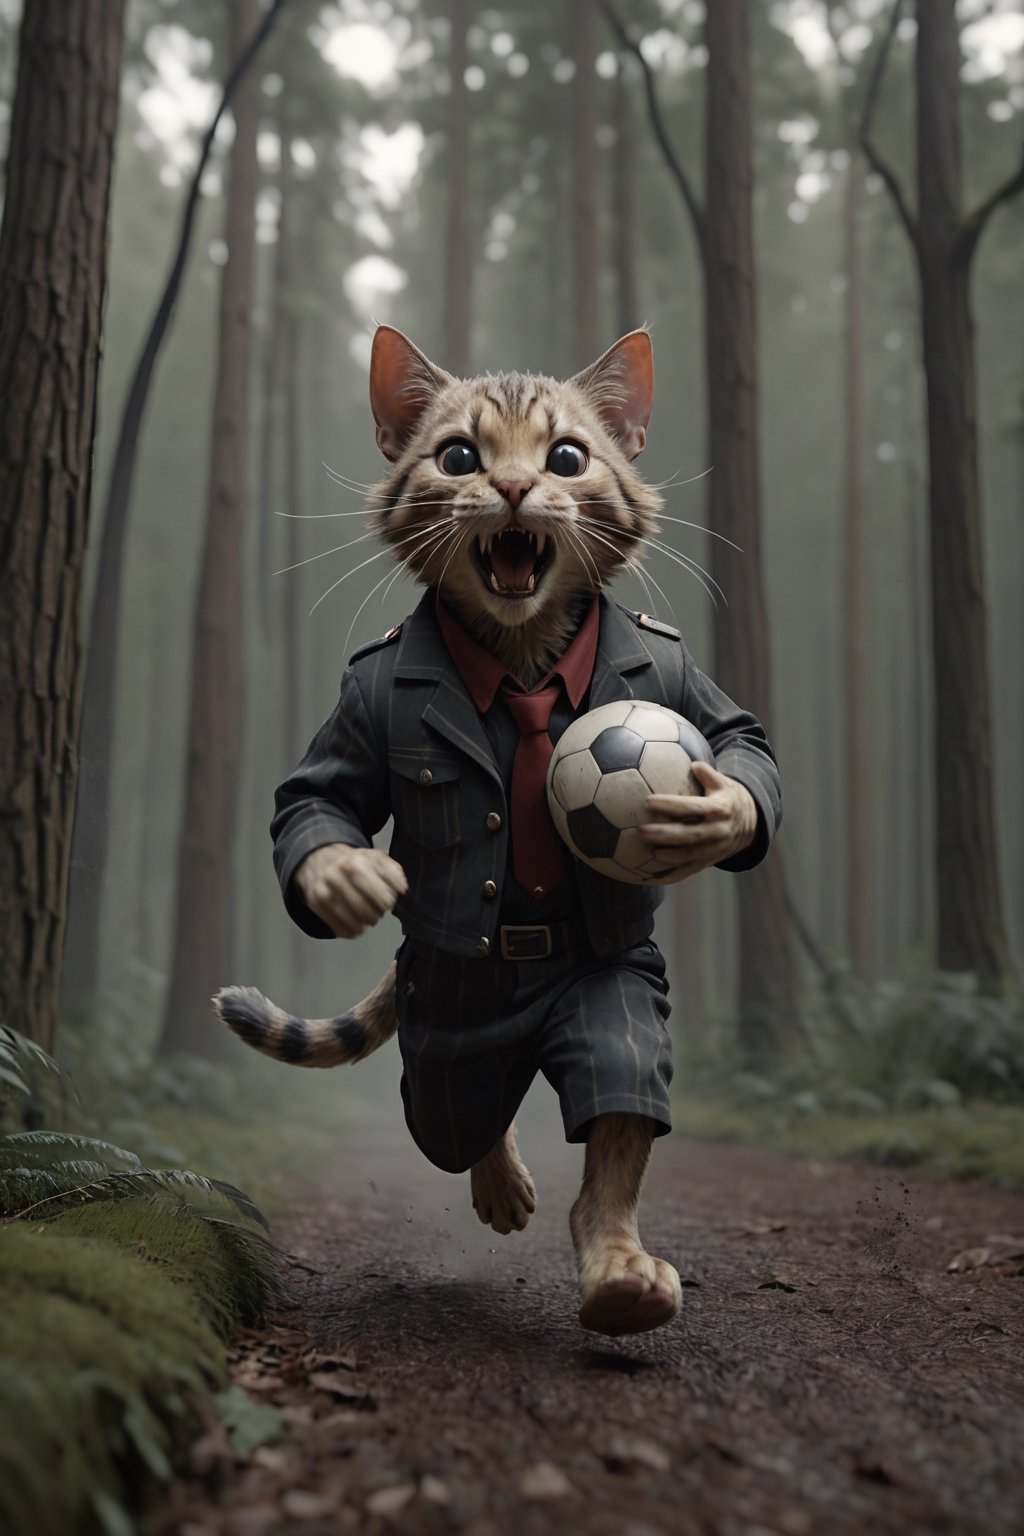 fury cat lord insanely running after stealing the football from a daddy mouse in the forest, cinematic